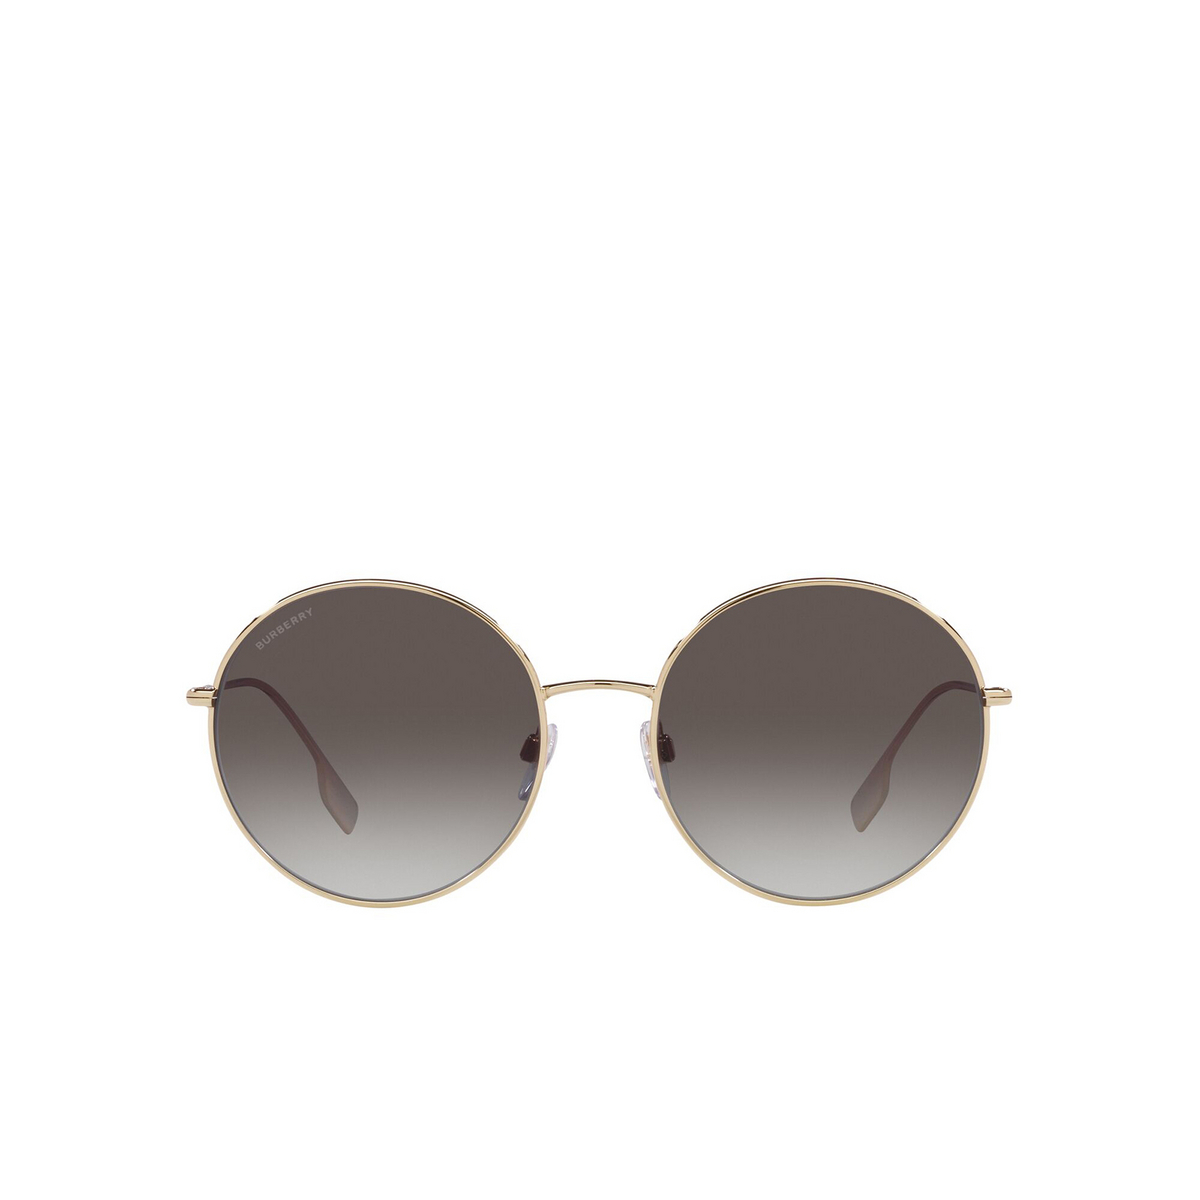 Burberry PIPPA Sunglasses 11098G Light Gold - front view